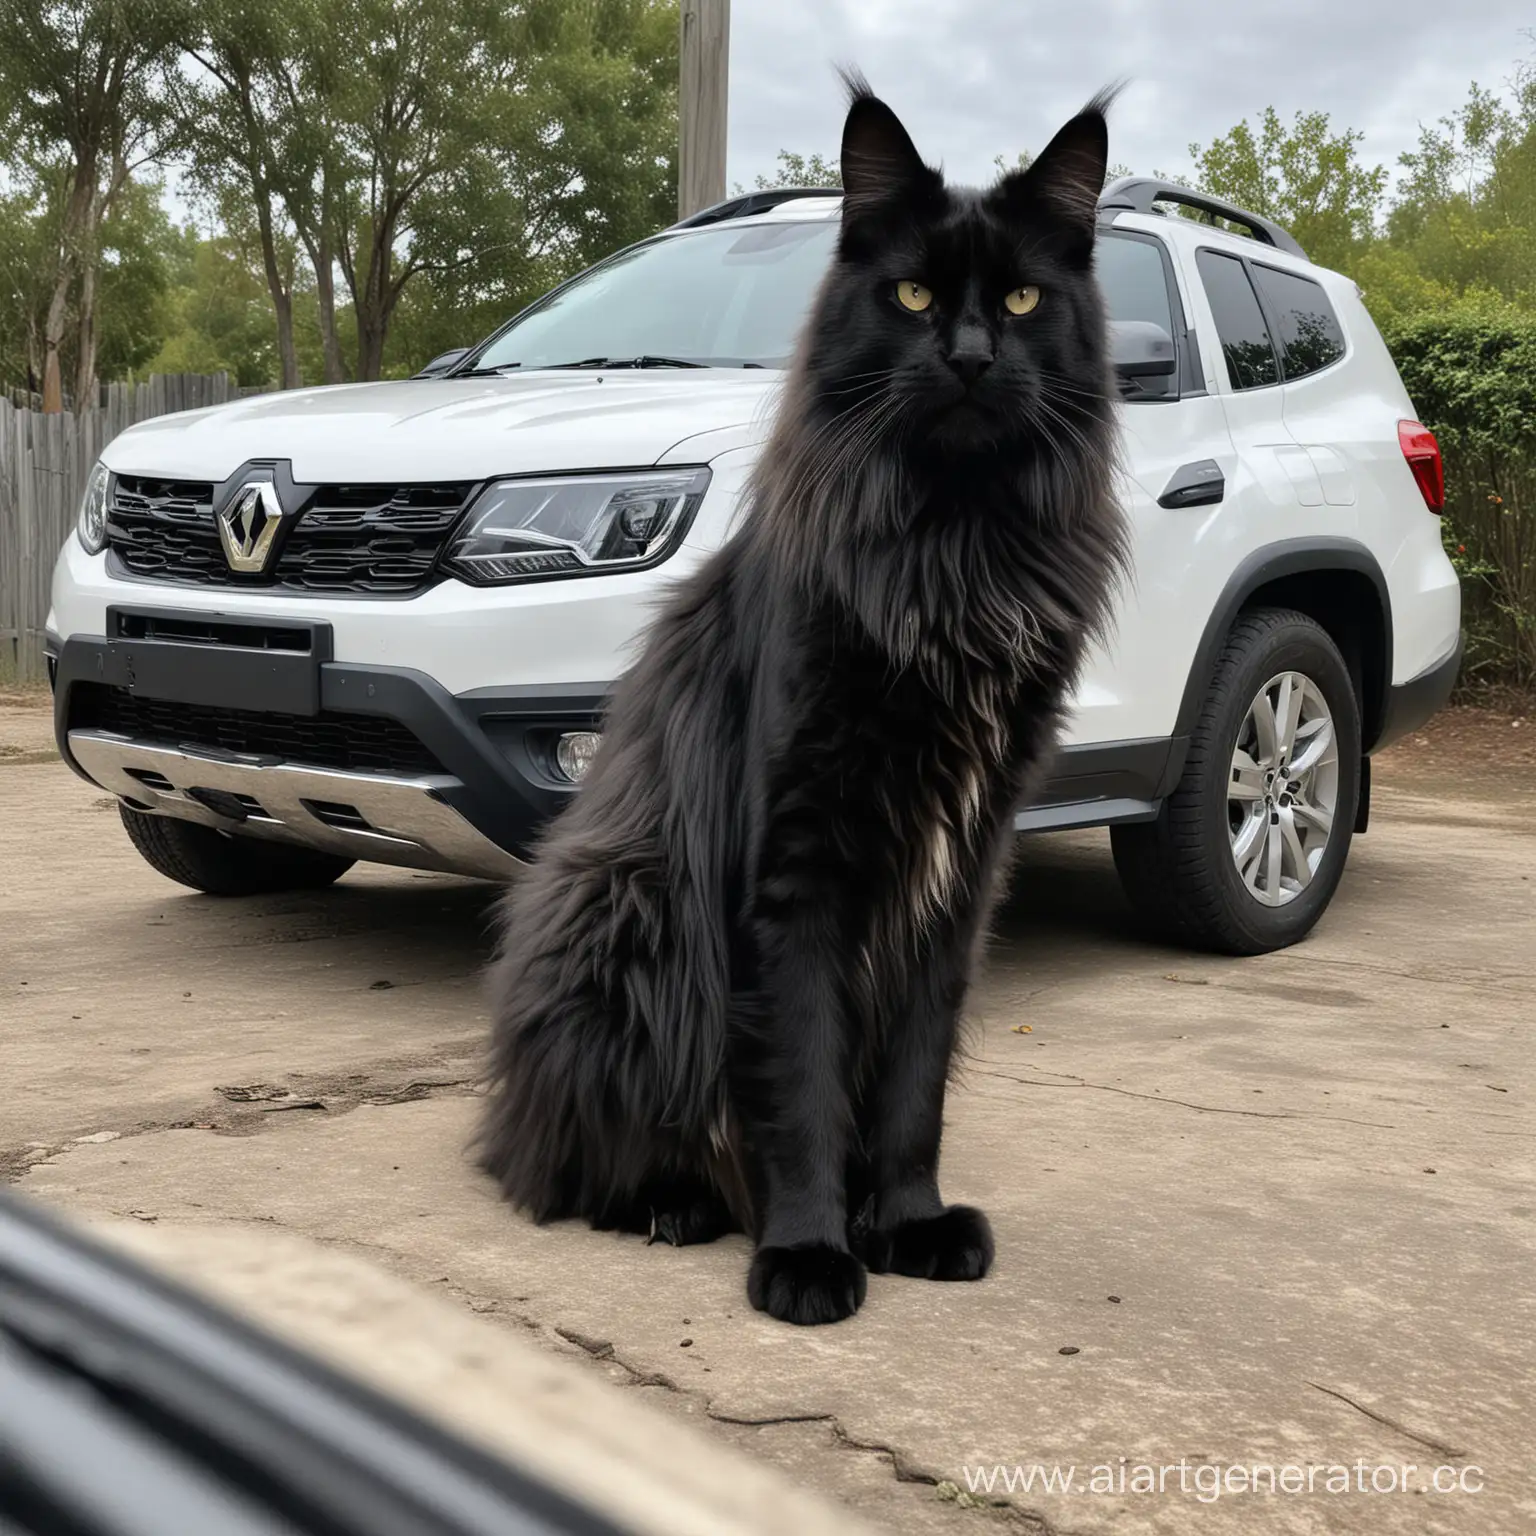 Giant-Maine-Coon-Cat-Beside-Miniature-Renault-Duster